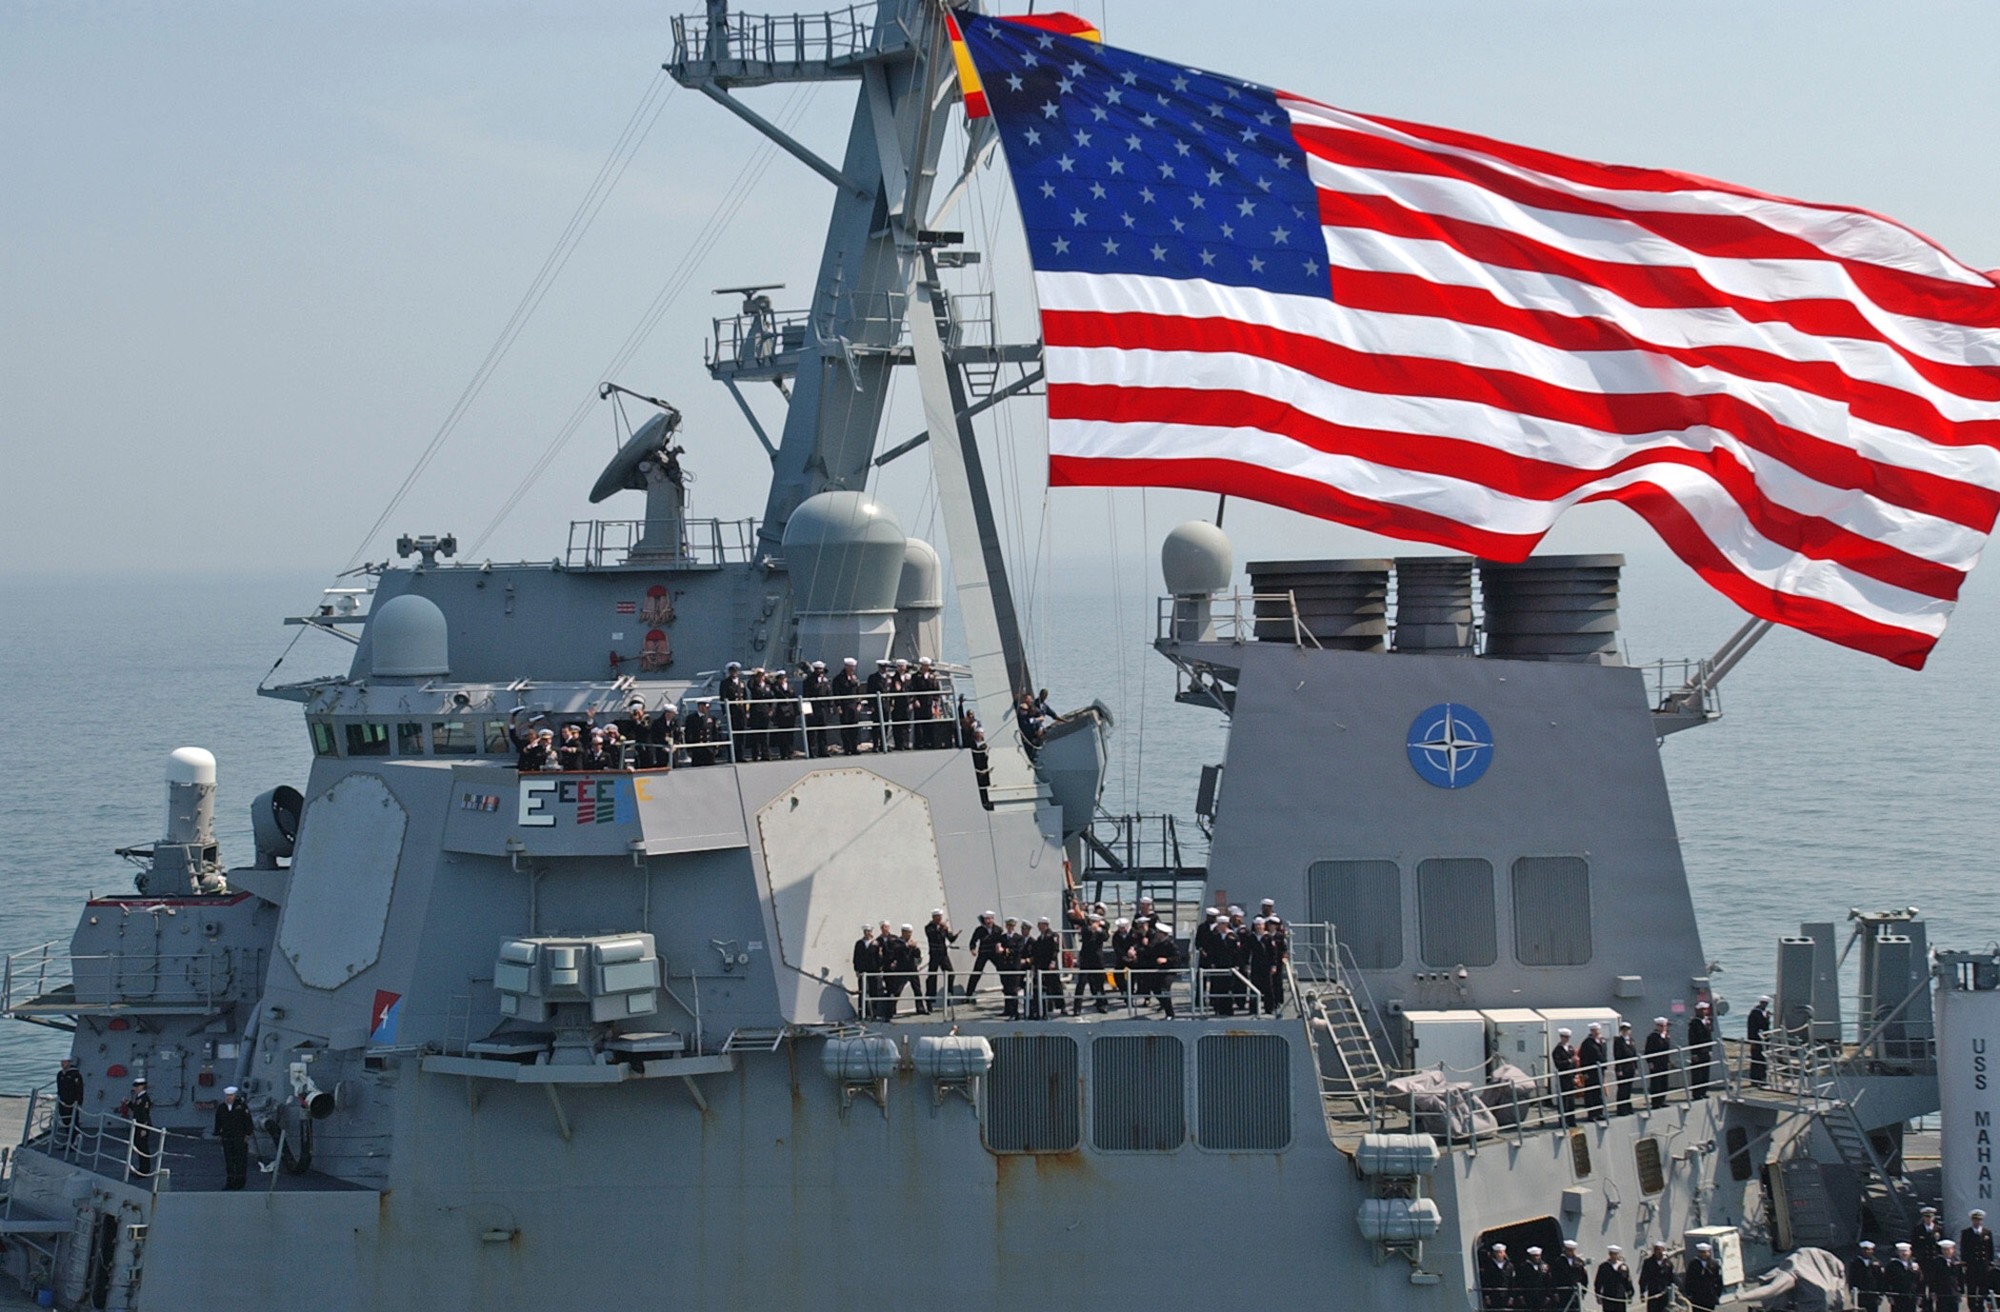 ddg-72 uss mahan guided missile destroyer arleigh burke class aegis bmd 33